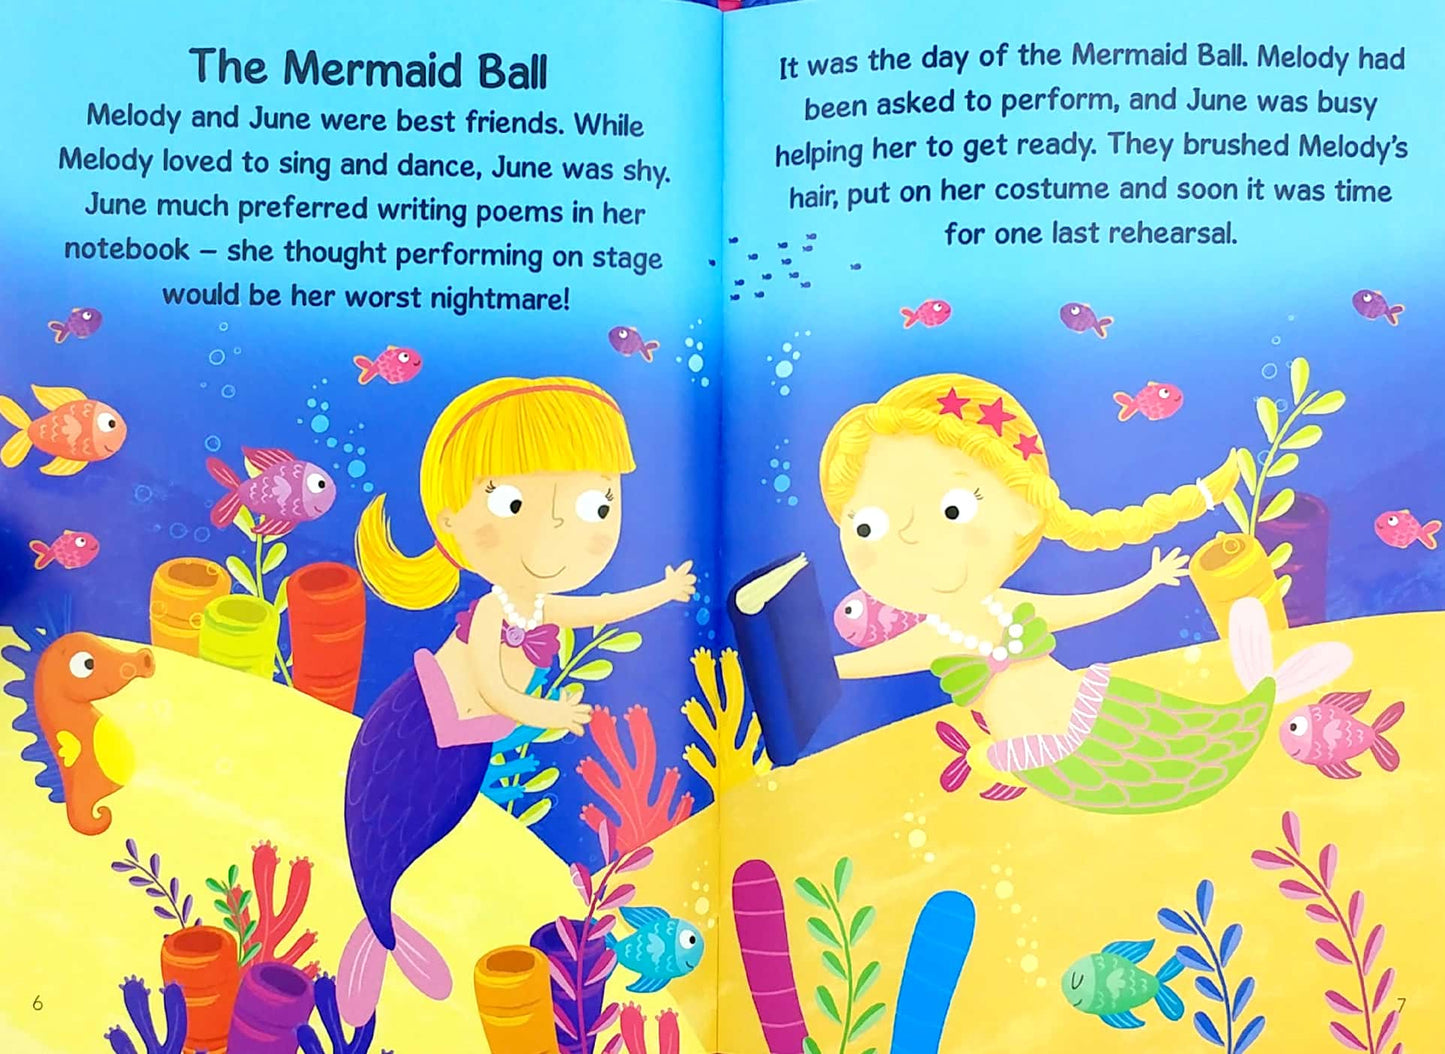 My Little Book Of Mermaid Stories - Hard Cover